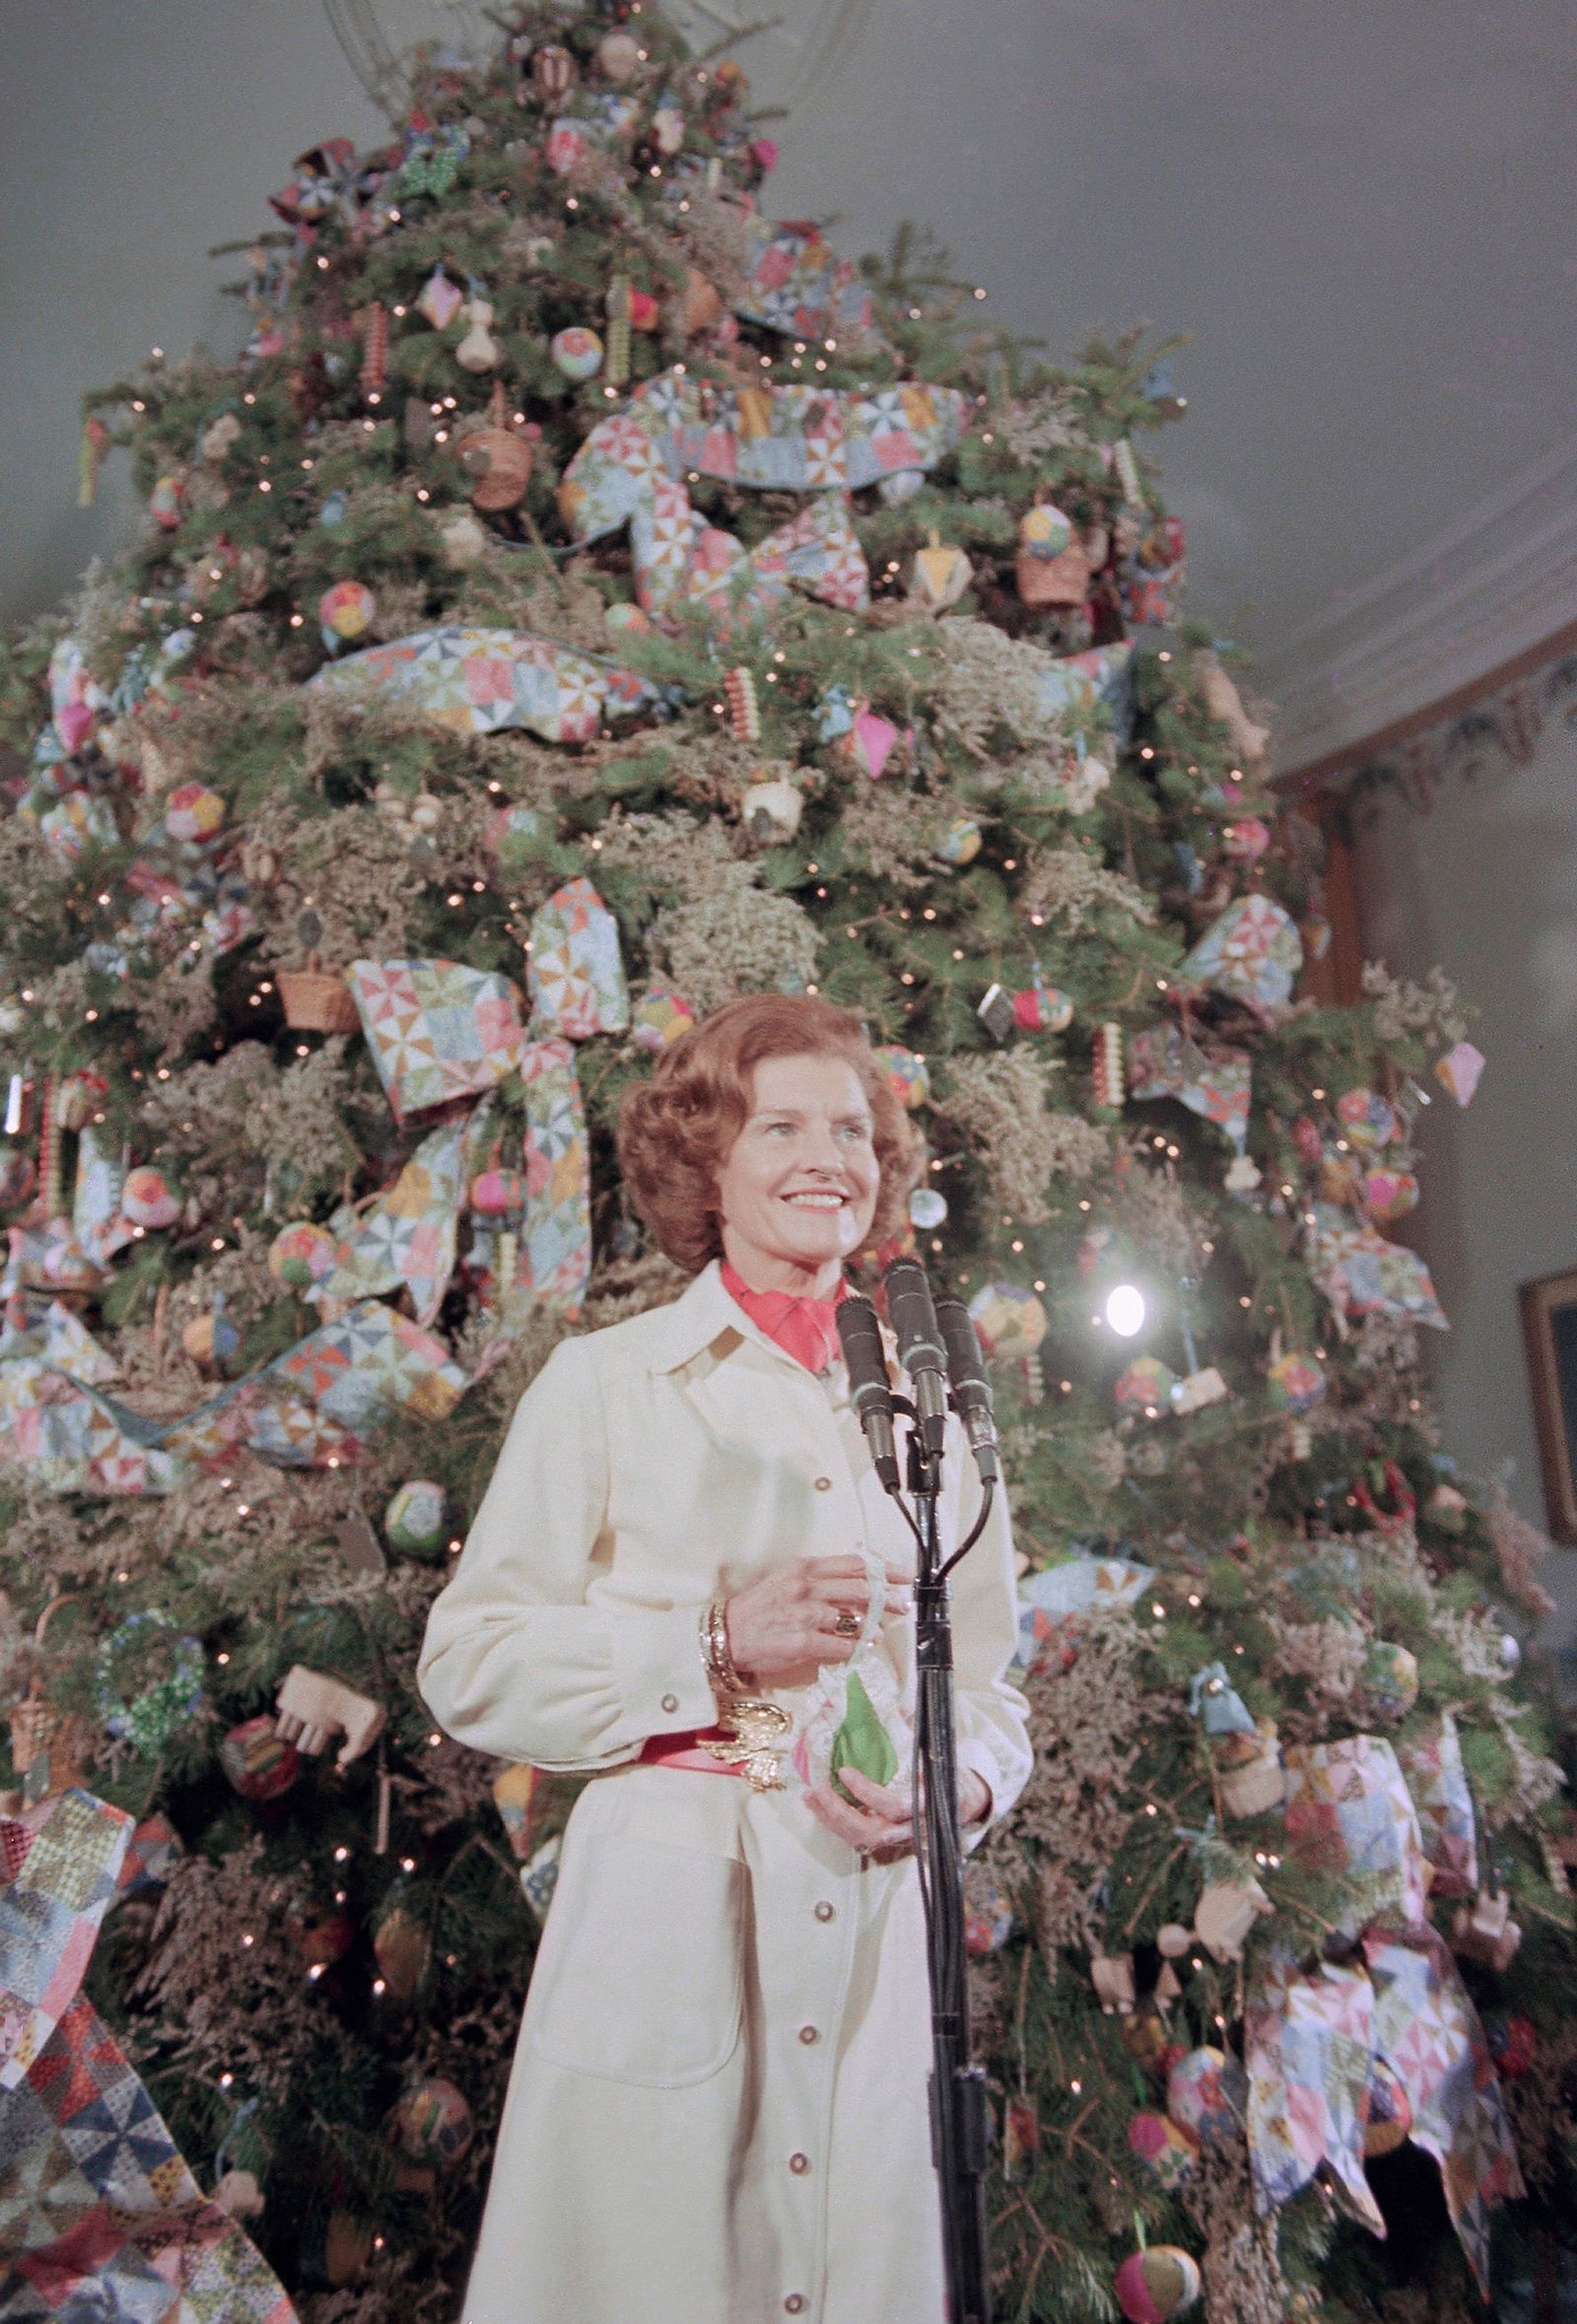 Betty Ford poses in front of the White House Christmas tree in Washington on Dec. 10, 1974. (AP Photo)